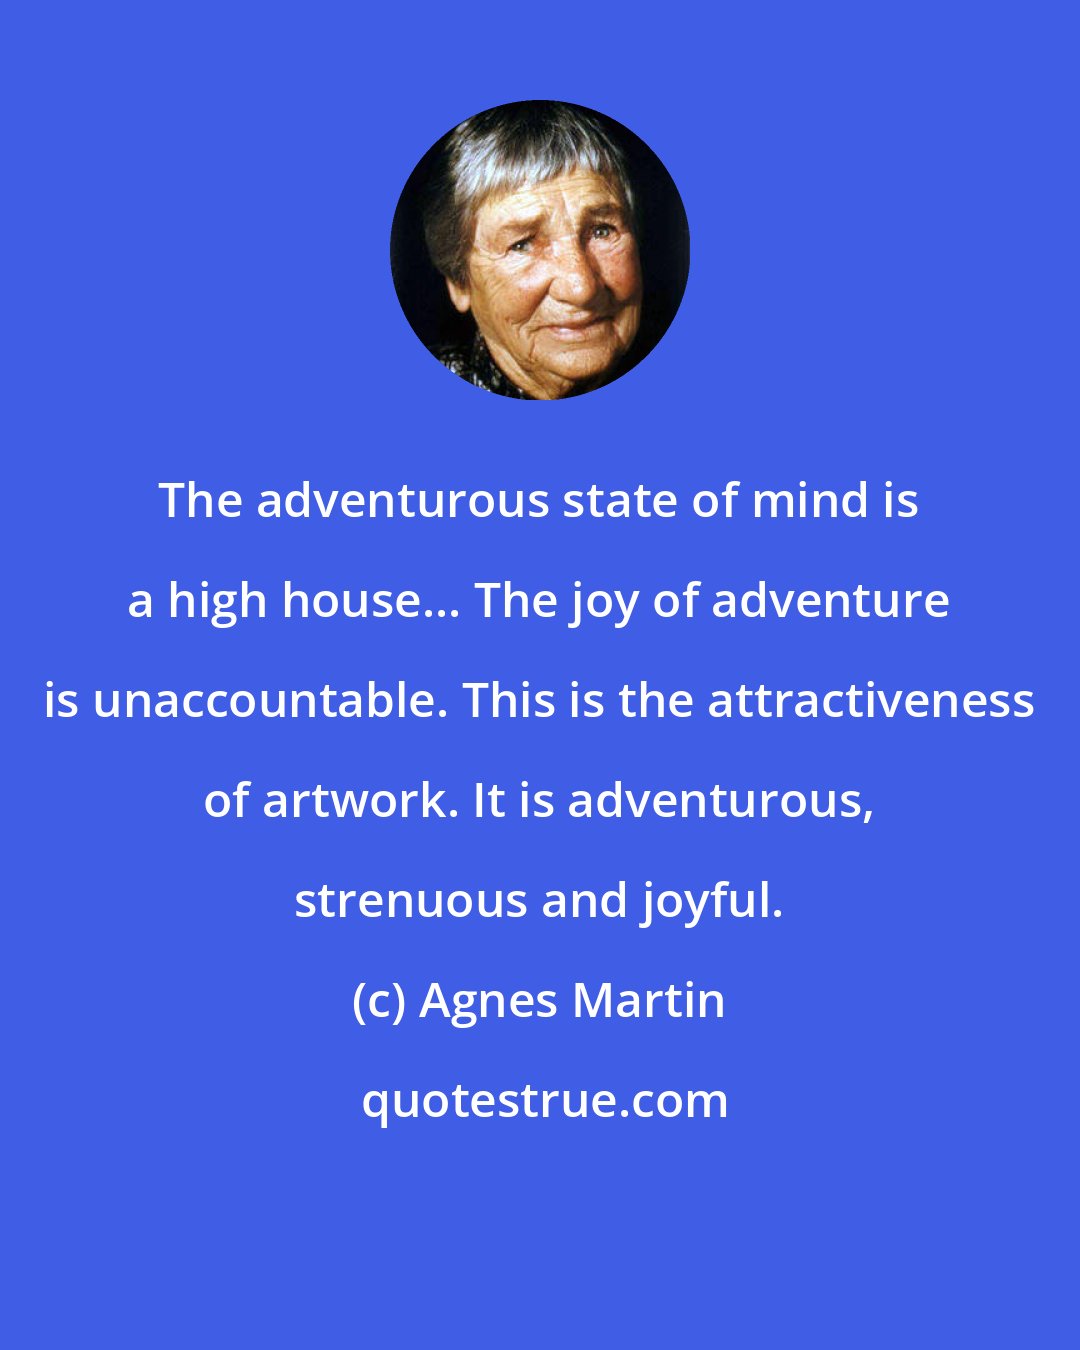 Agnes Martin: The adventurous state of mind is a high house... The joy of adventure is unaccountable. This is the attractiveness of artwork. It is adventurous, strenuous and joyful.